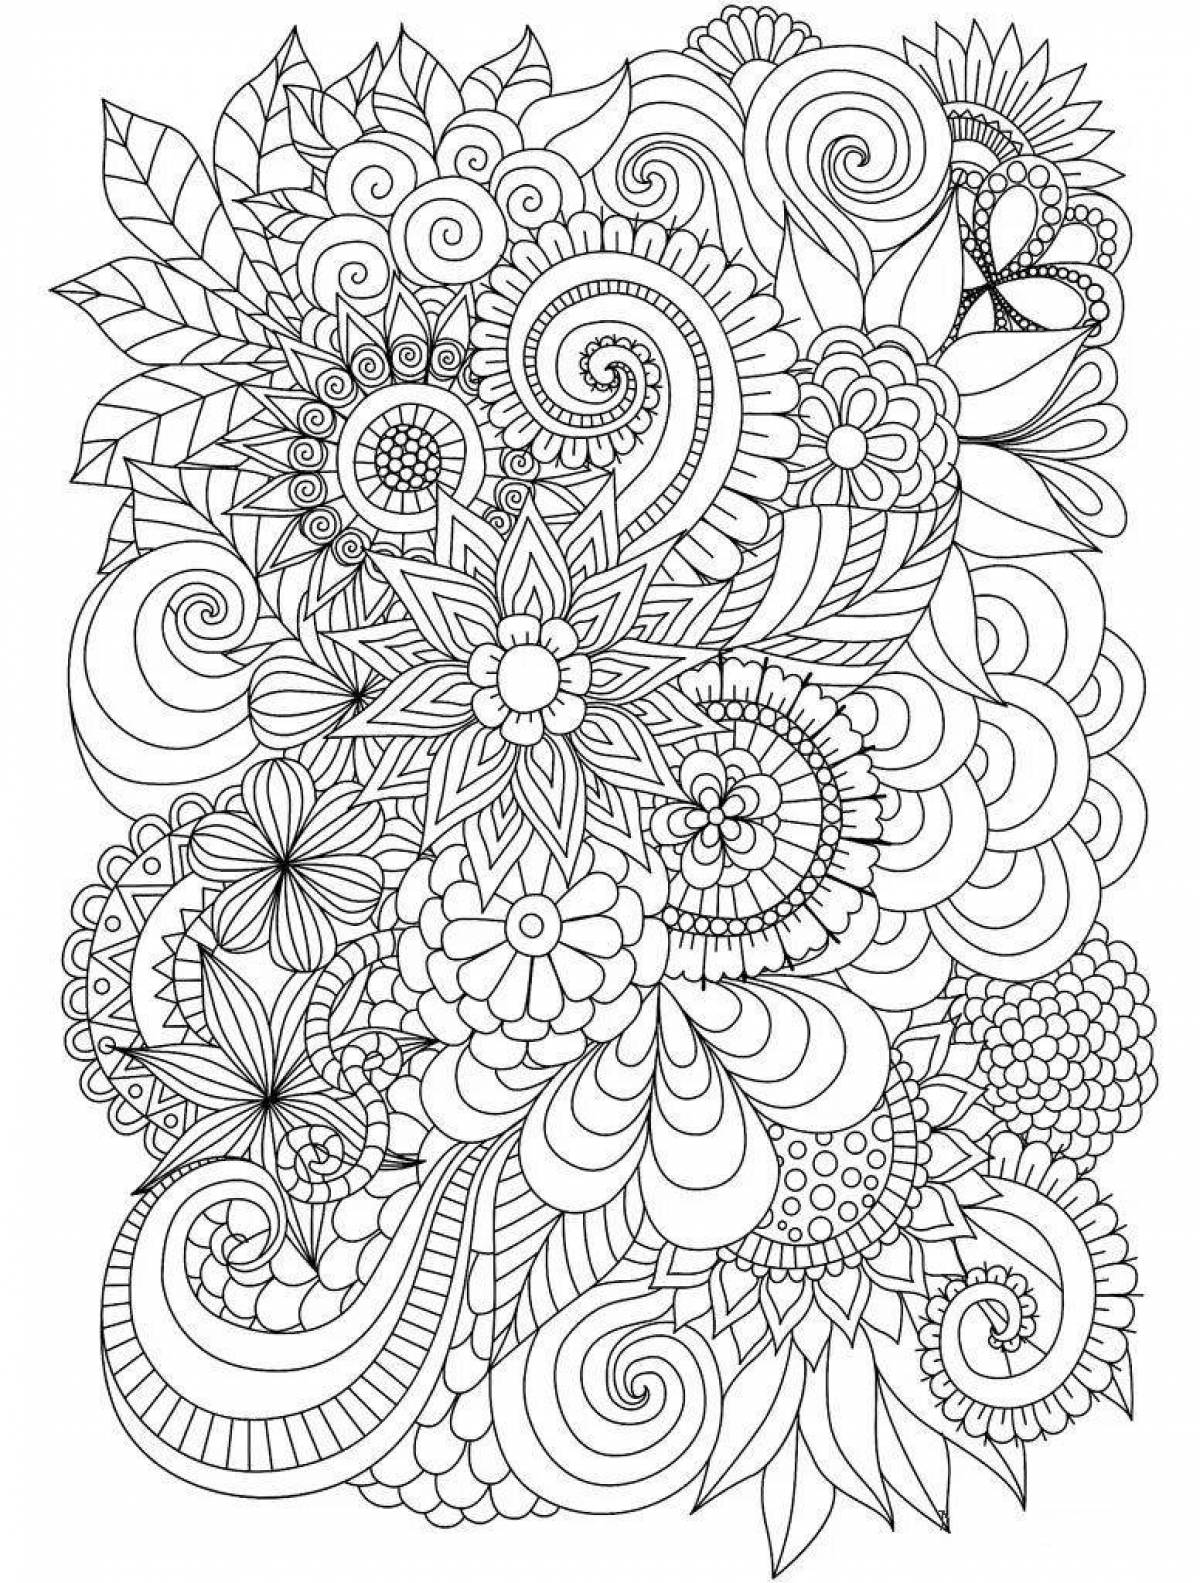 Soothing simple coloring book for adults